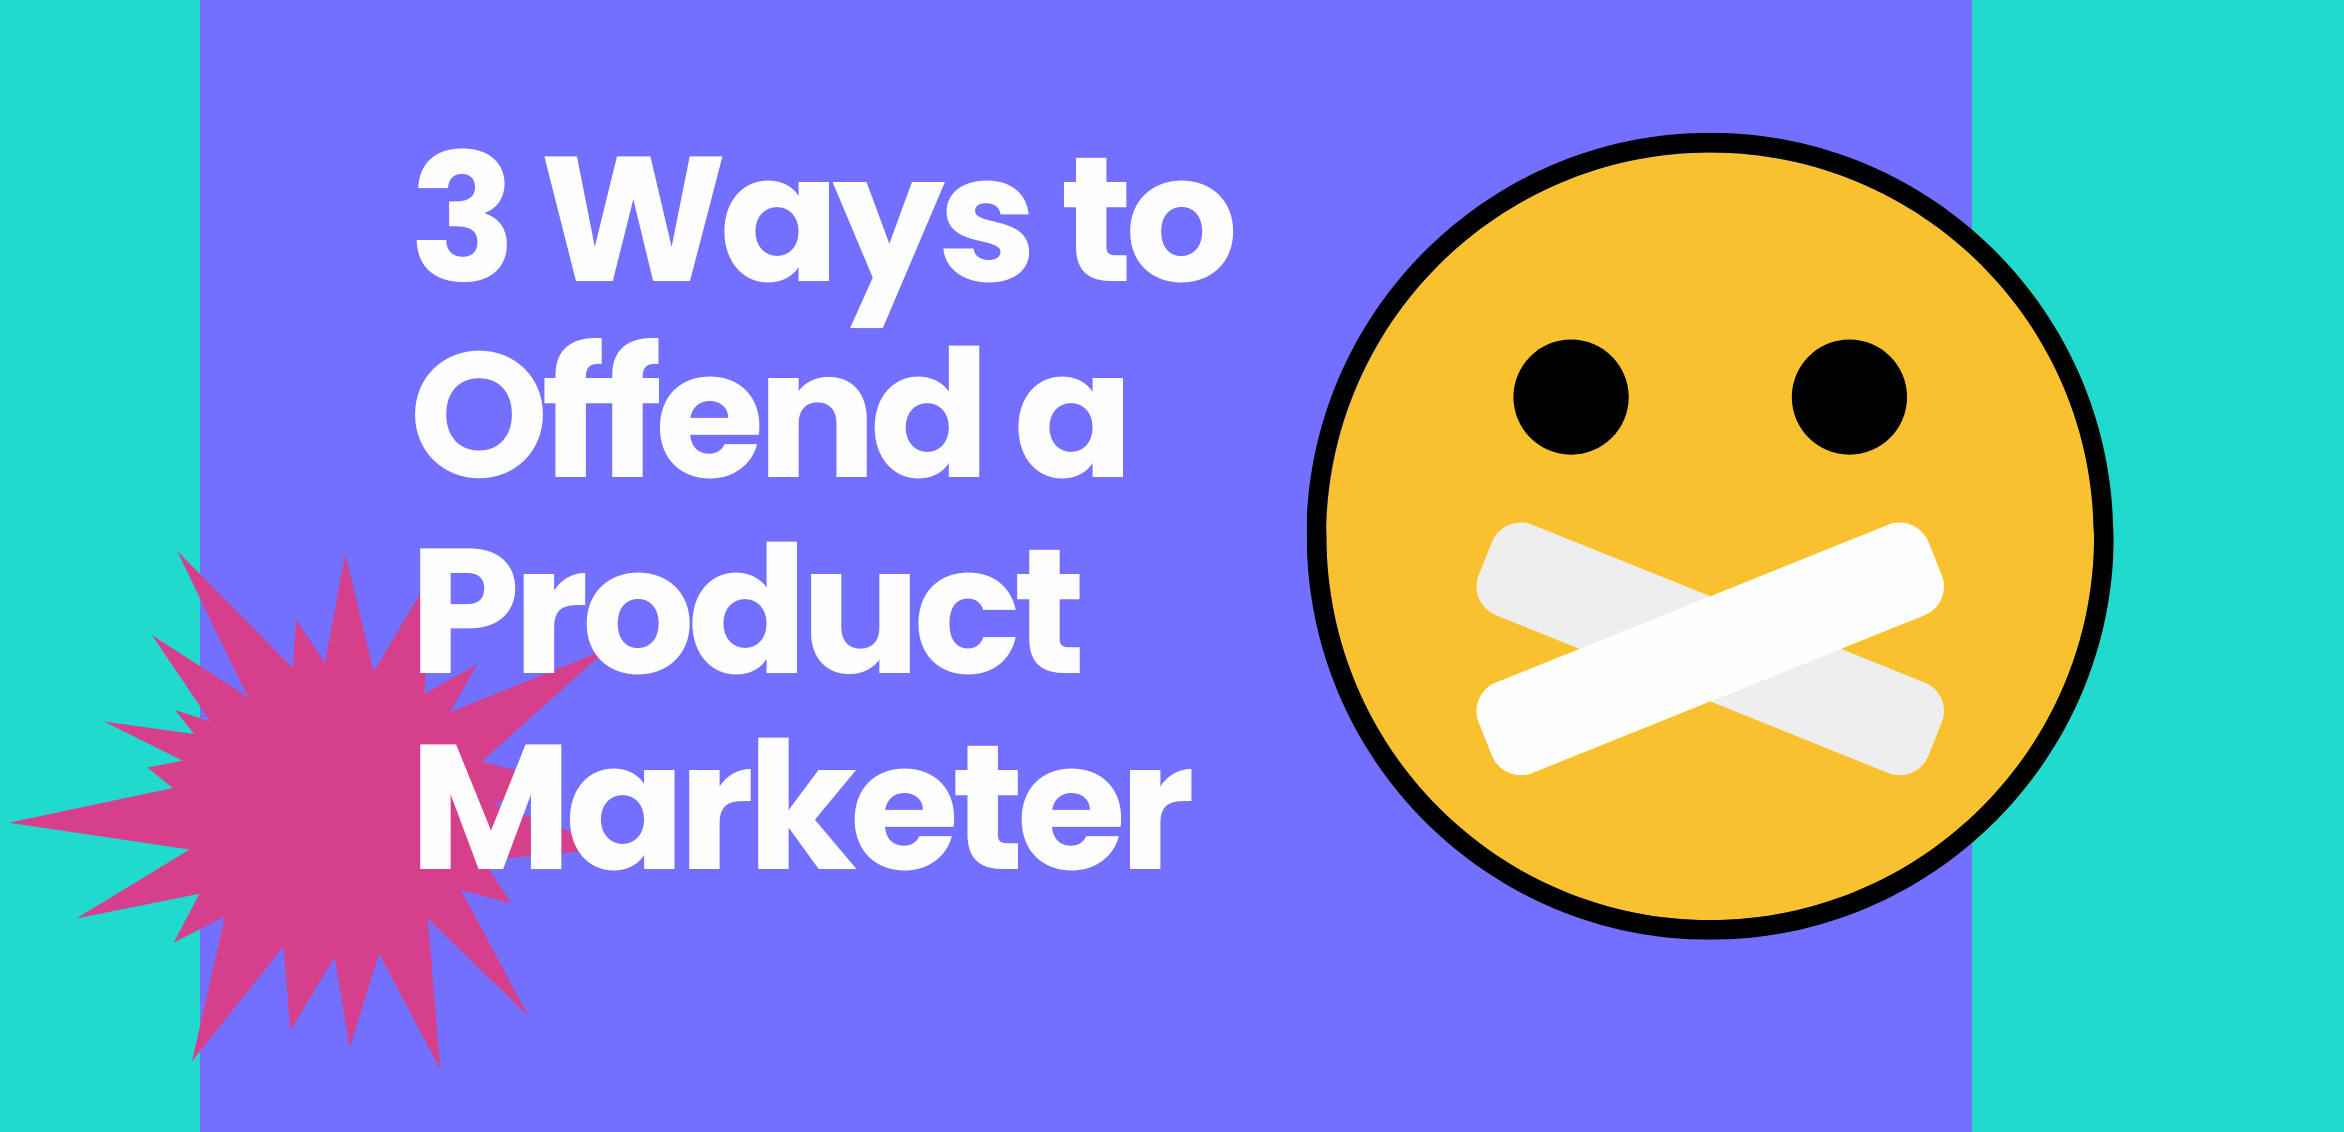 3 ways to offend a product marketer in six words or less